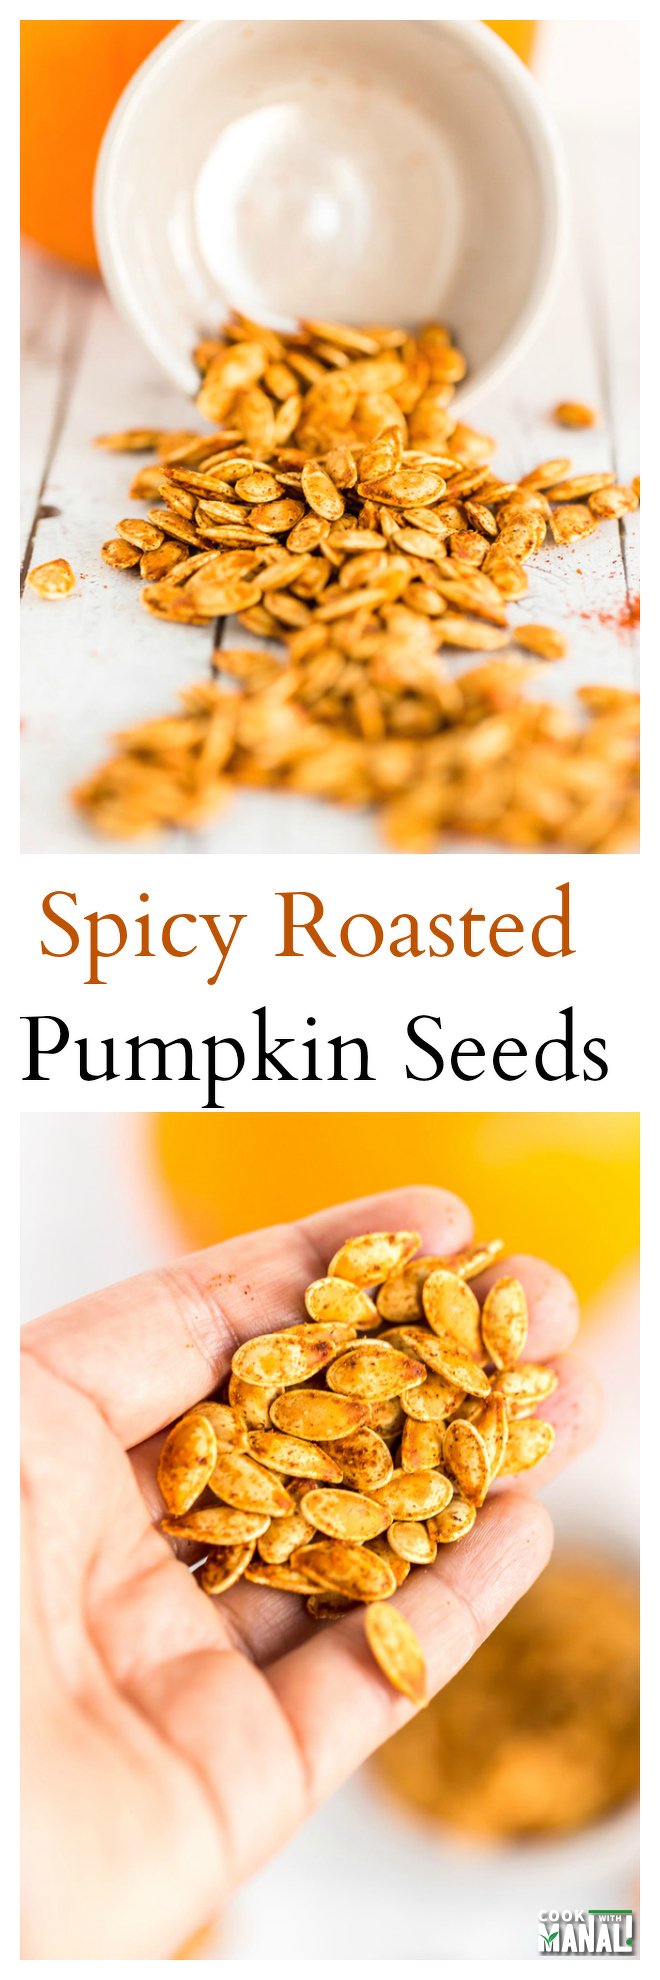 Spicy Roasted Pumpkin Seeds Collage